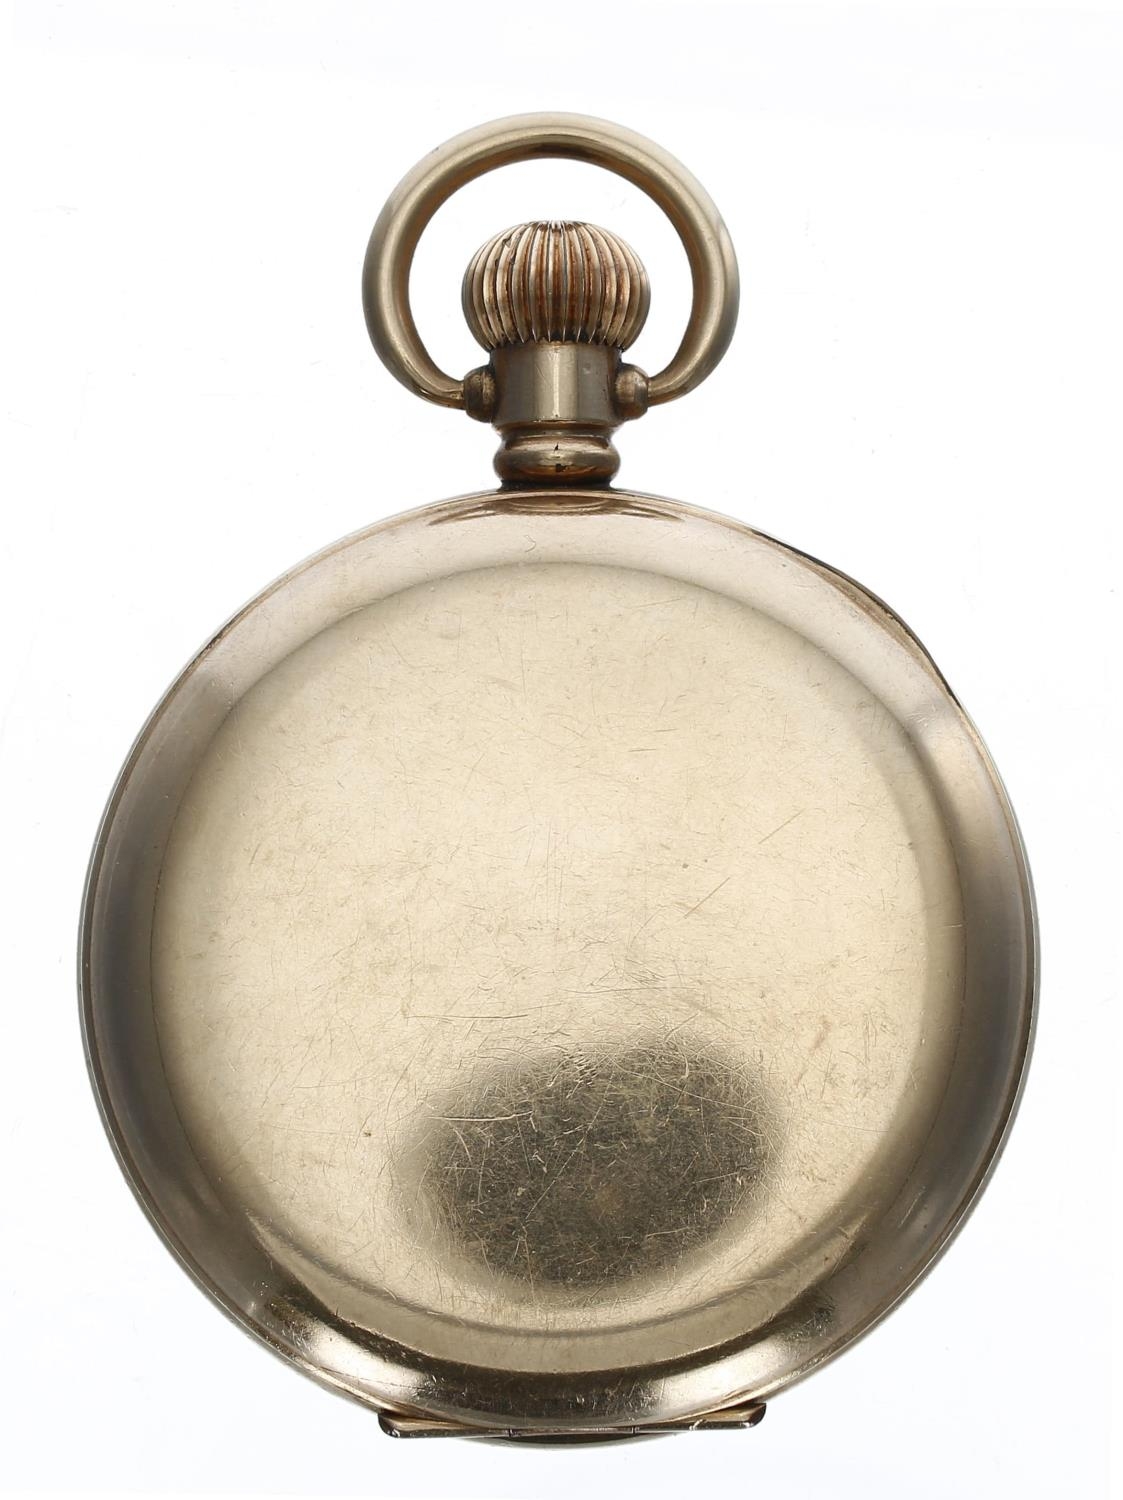 Rolex - Swiss gold plated lever pocket watch, signed 17 jewel three adj. movement, signed dial - Image 4 of 4